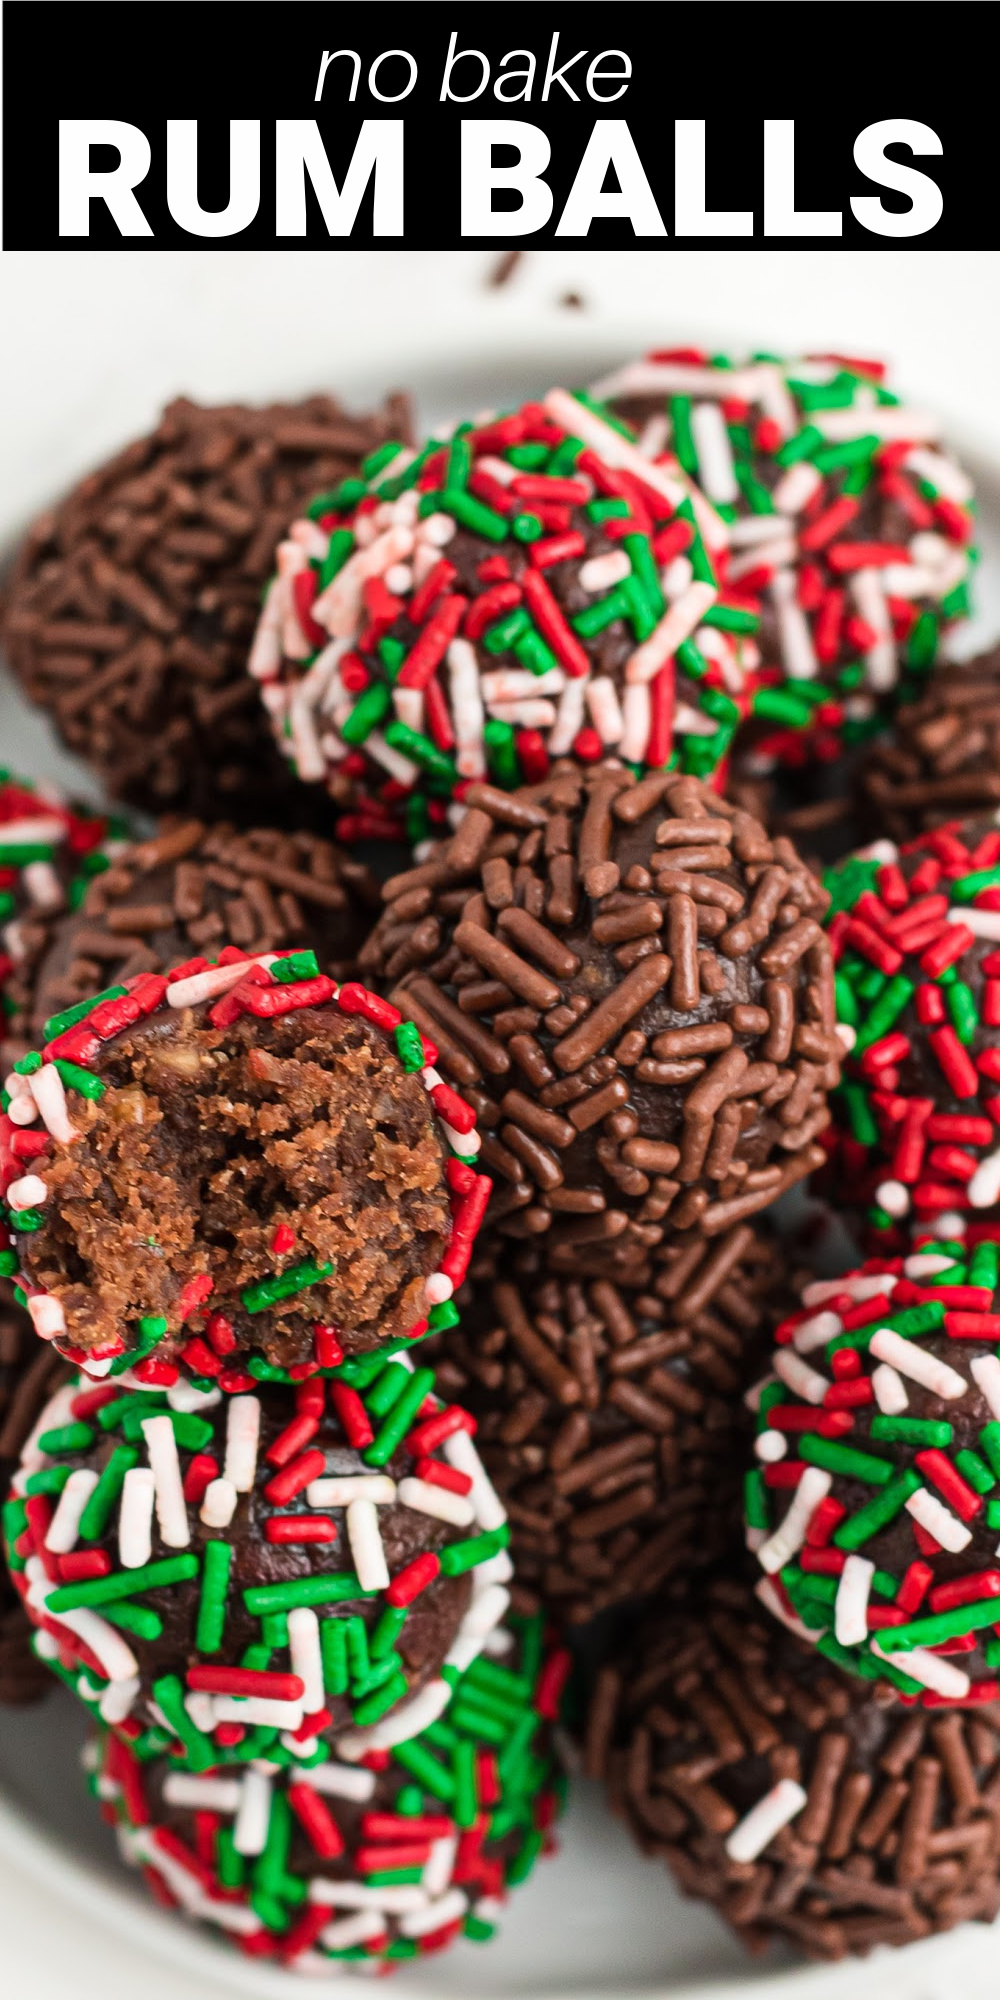 Chocolate Rum Balls have been a confectionary Christmas tradition for years! They're delightful truffle-like balls that are always a huge hit at any party, cookie swap or holiday get-together! 